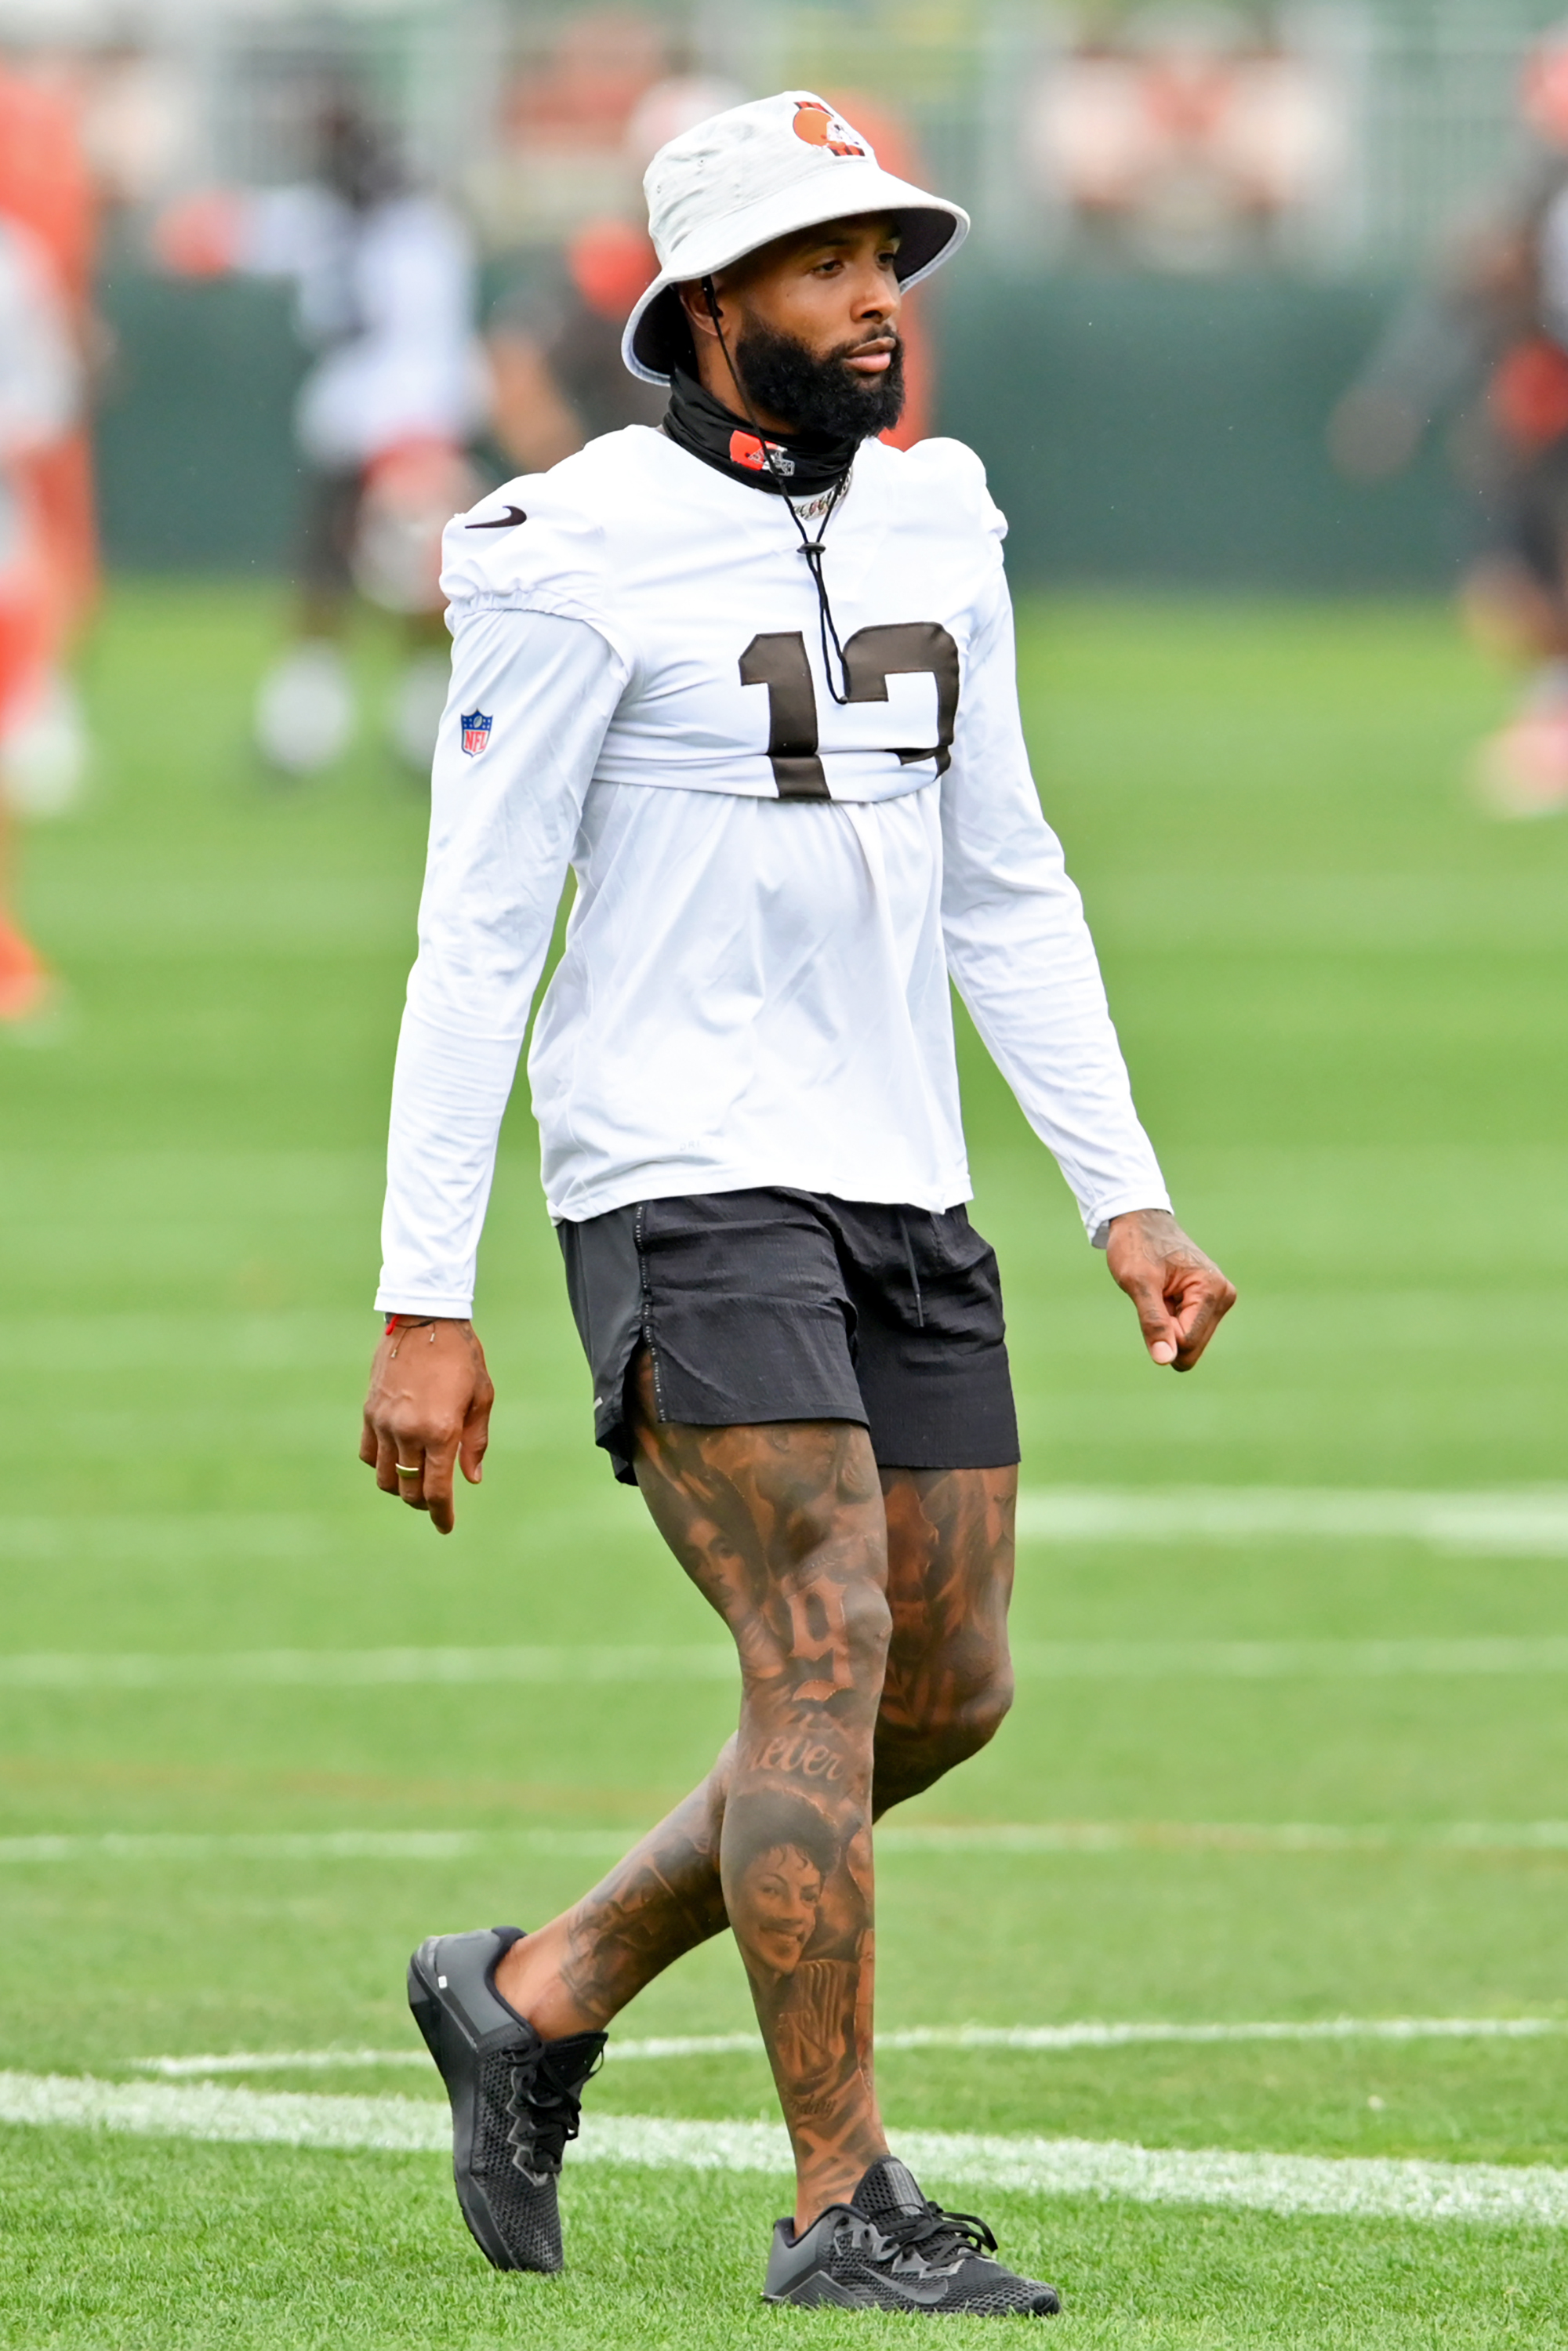 Wide receiver Odell Beckham Jr. #13 of the Cleveland Browns walks to the field during the second day of Cleveland Browns Training Camp on July 29, 2021 in Berea, Ohio.